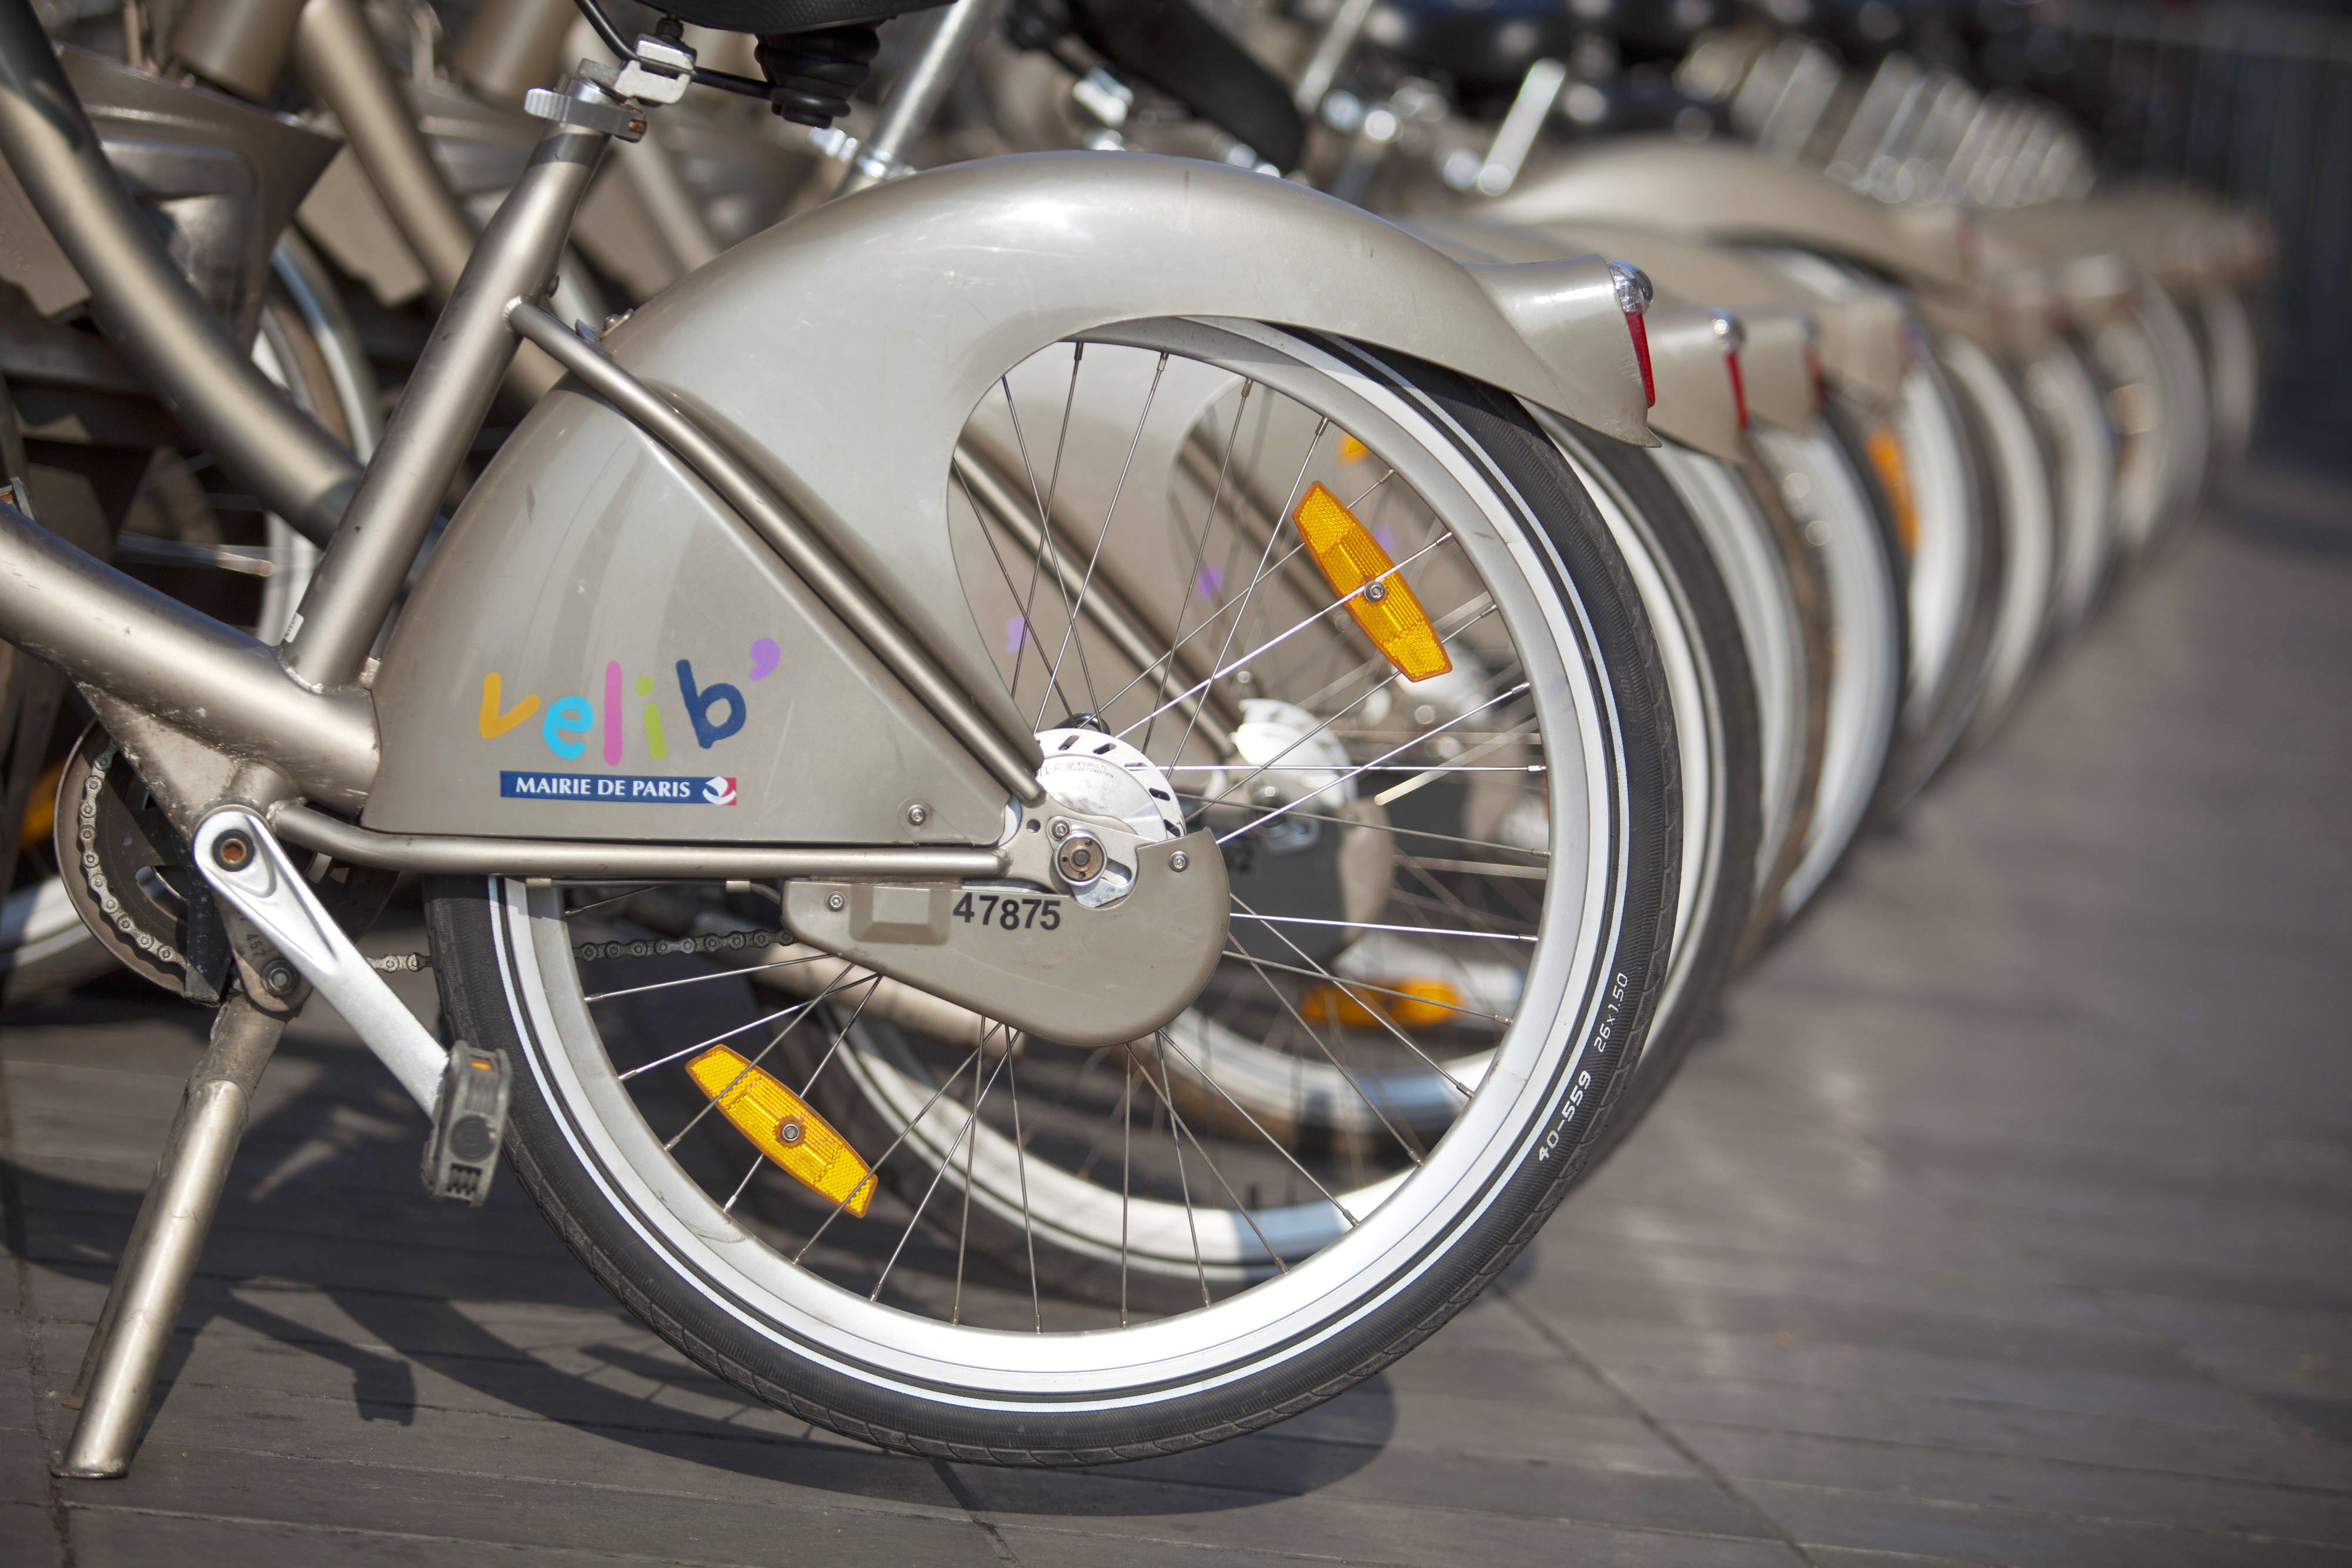 Velib' bicycles in Paris on March 13, 2014. (Balint Porneczi—Bloomberg/Getty Images)